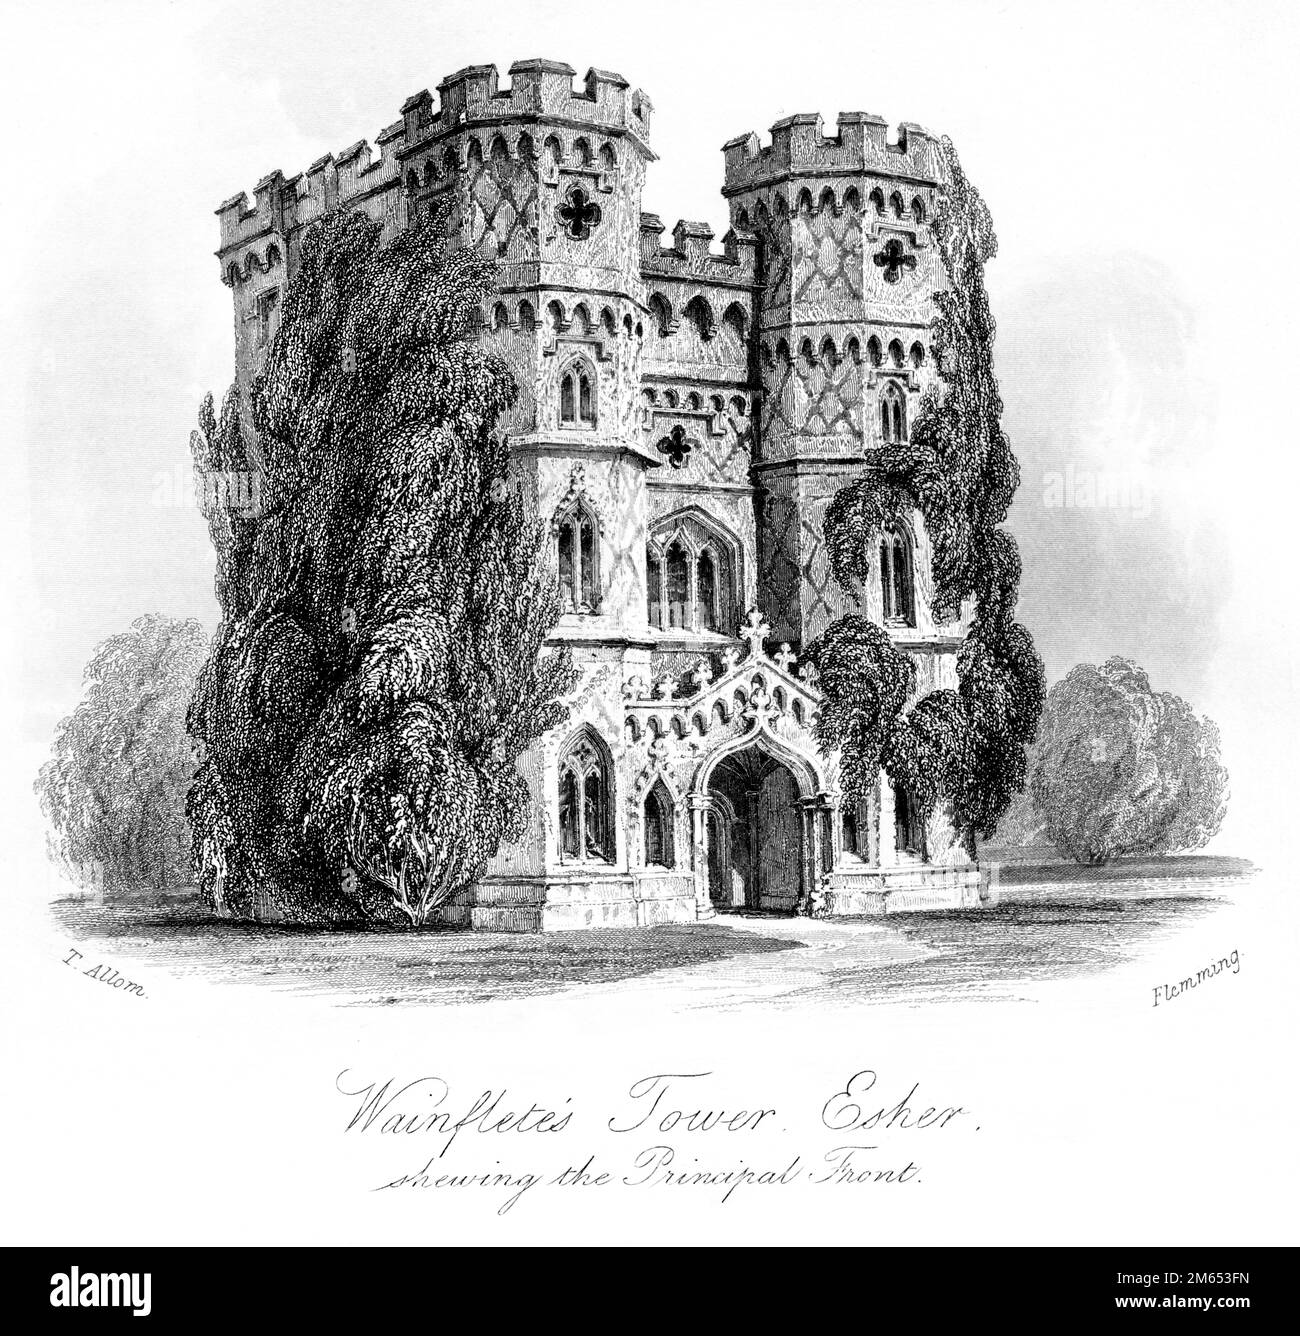 An engraving of Wainfletes Tower Esher shewing the Principal Front, (Wayneflete Tower) Surrey scanned at high resolution from a book printed in 1850. Stock Photo